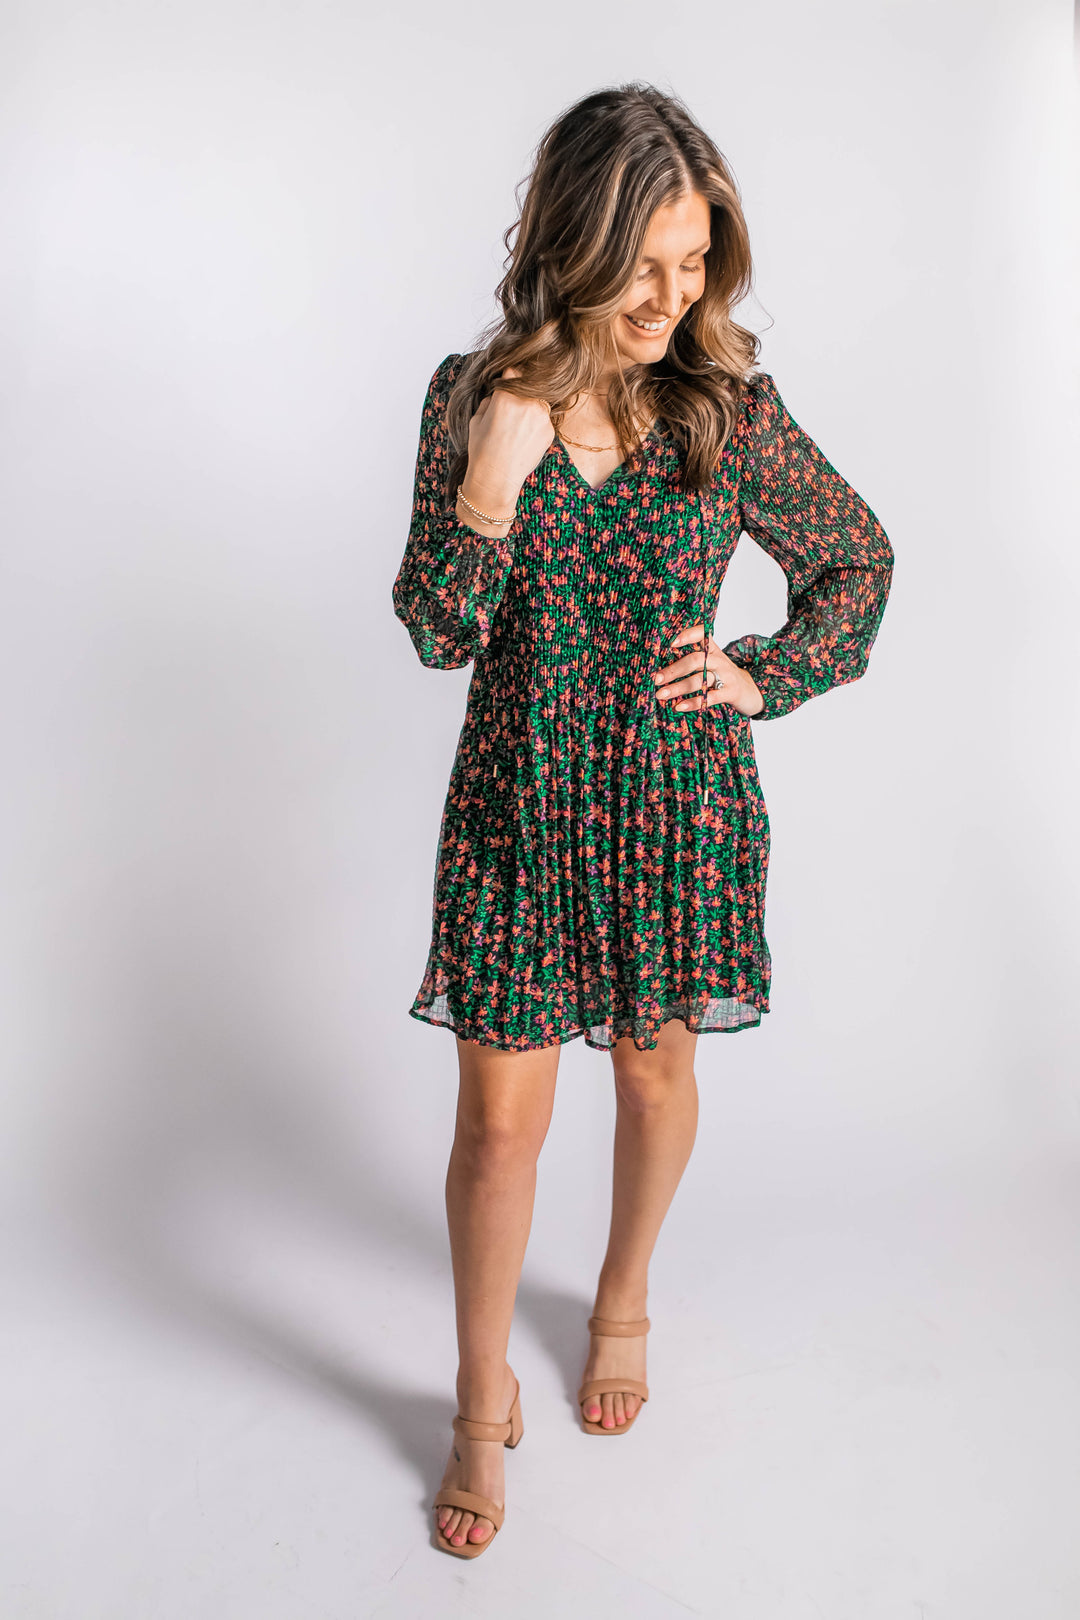 The Time to Bloom Floral Dress